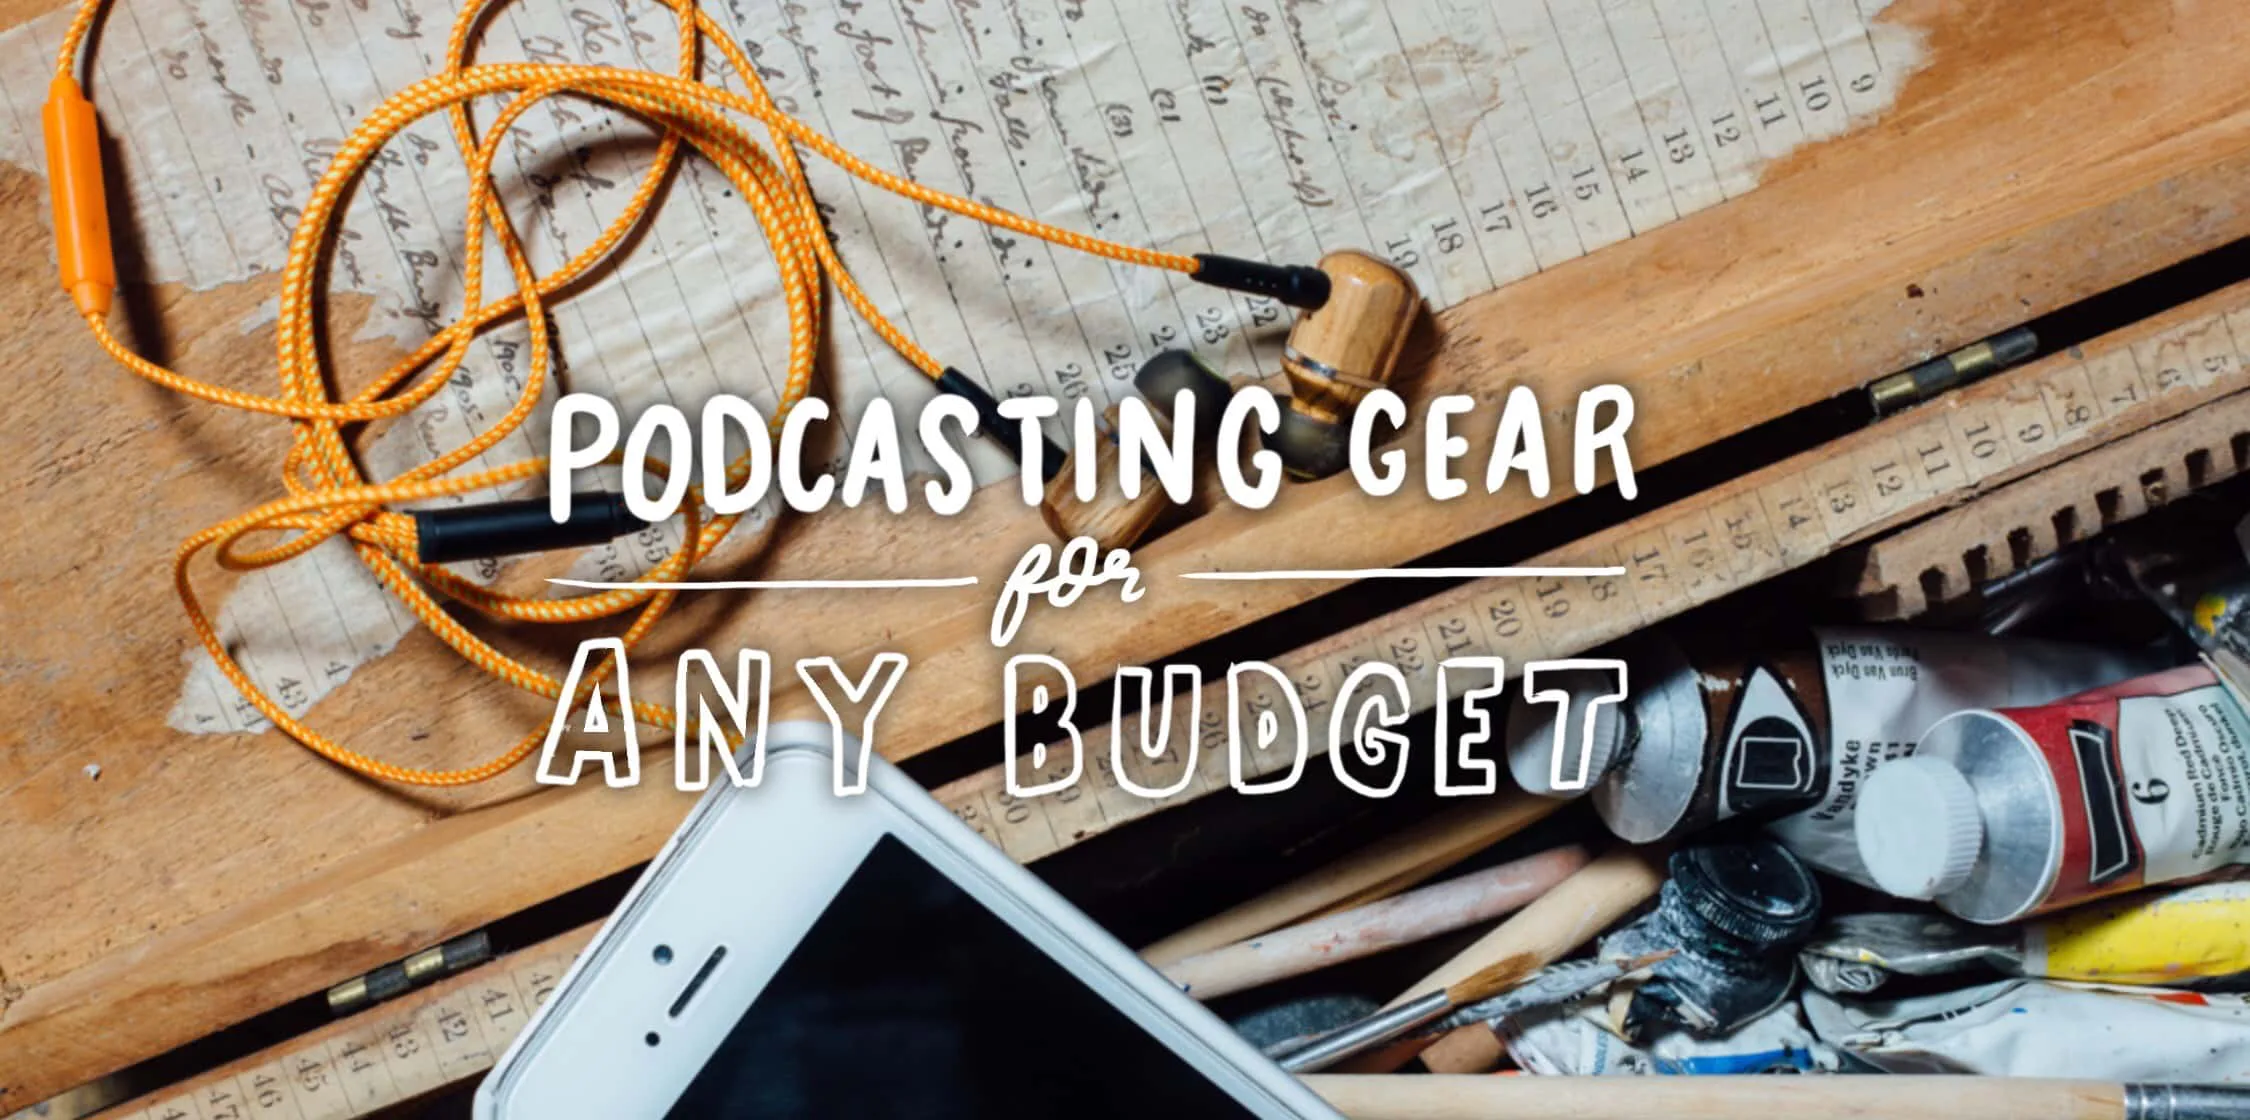 The podcast gear you need to start recording on any budget